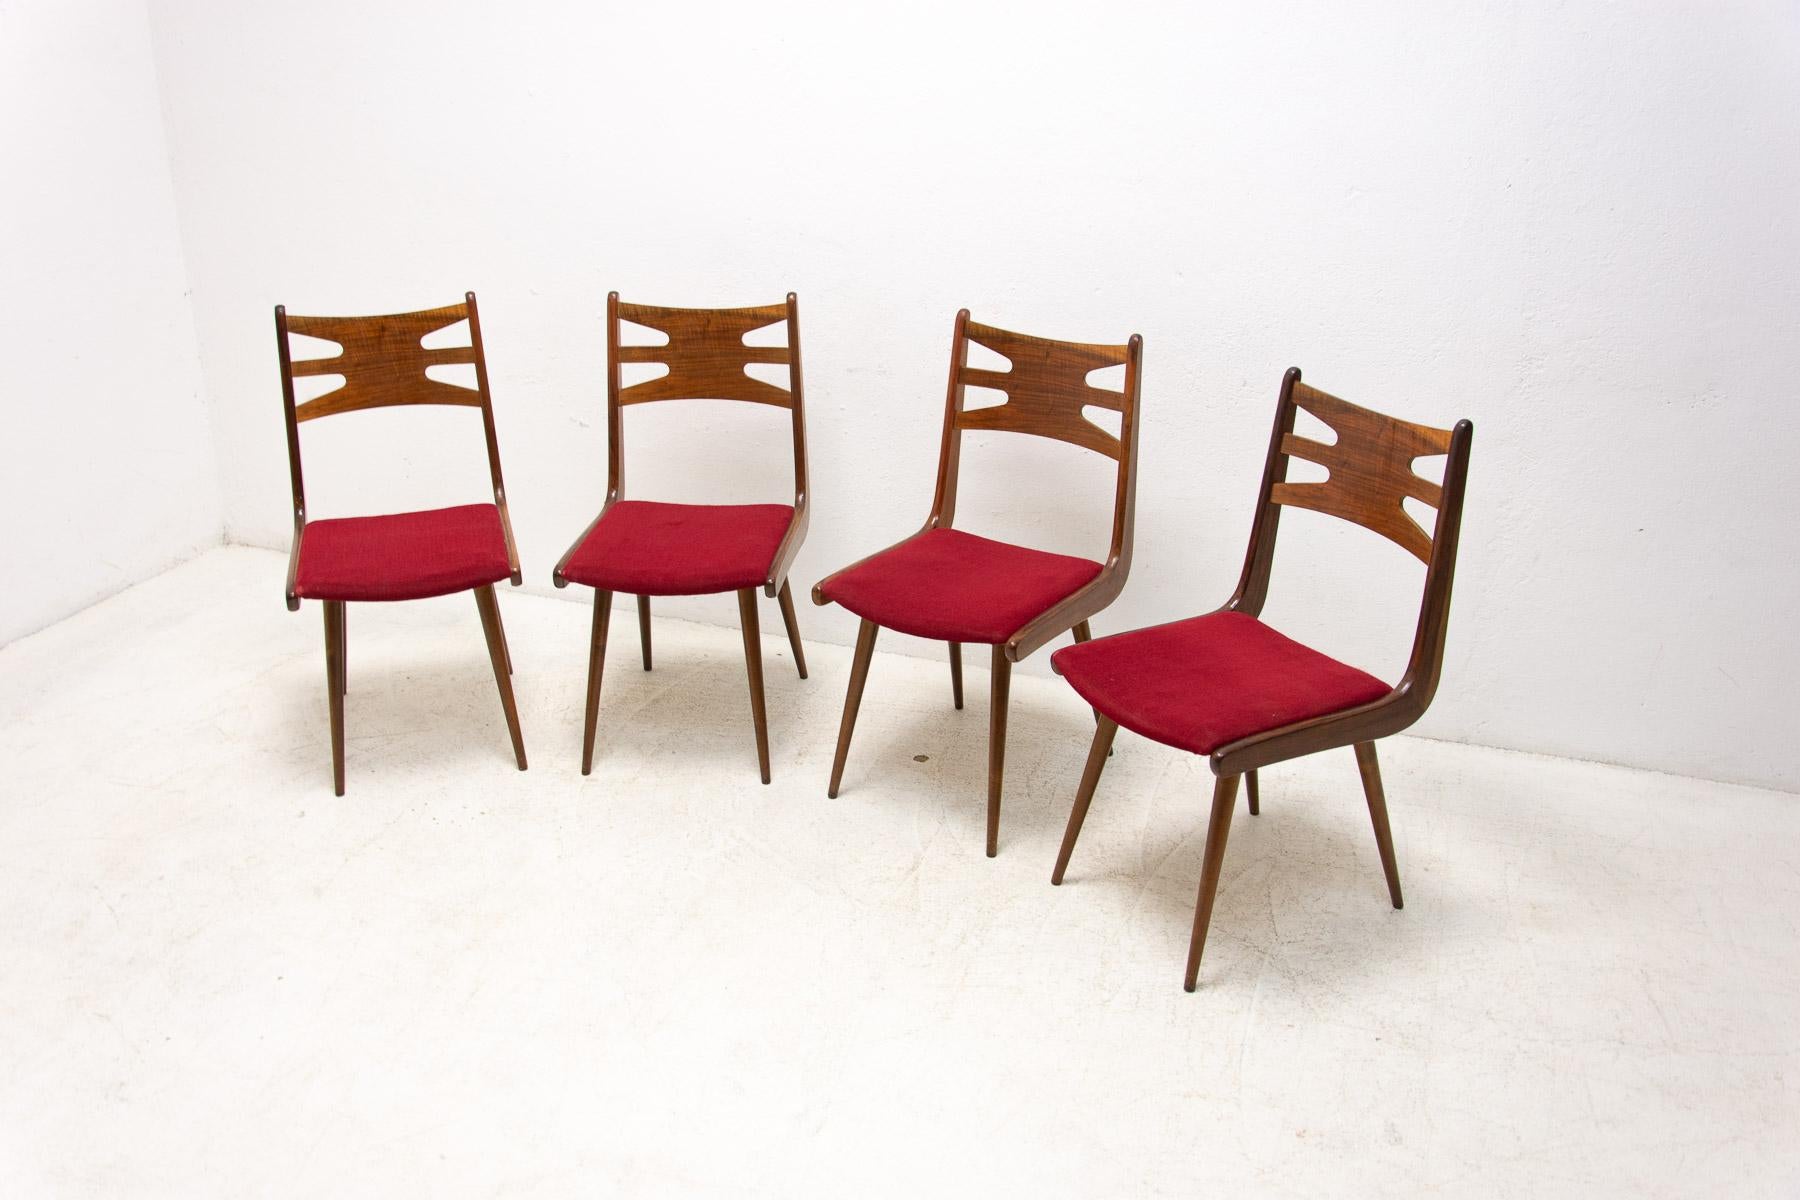 Set of Upholstered Walnut Dining Chairs, 1970s, Czechoslovakia In Good Condition In Prague 8, CZ